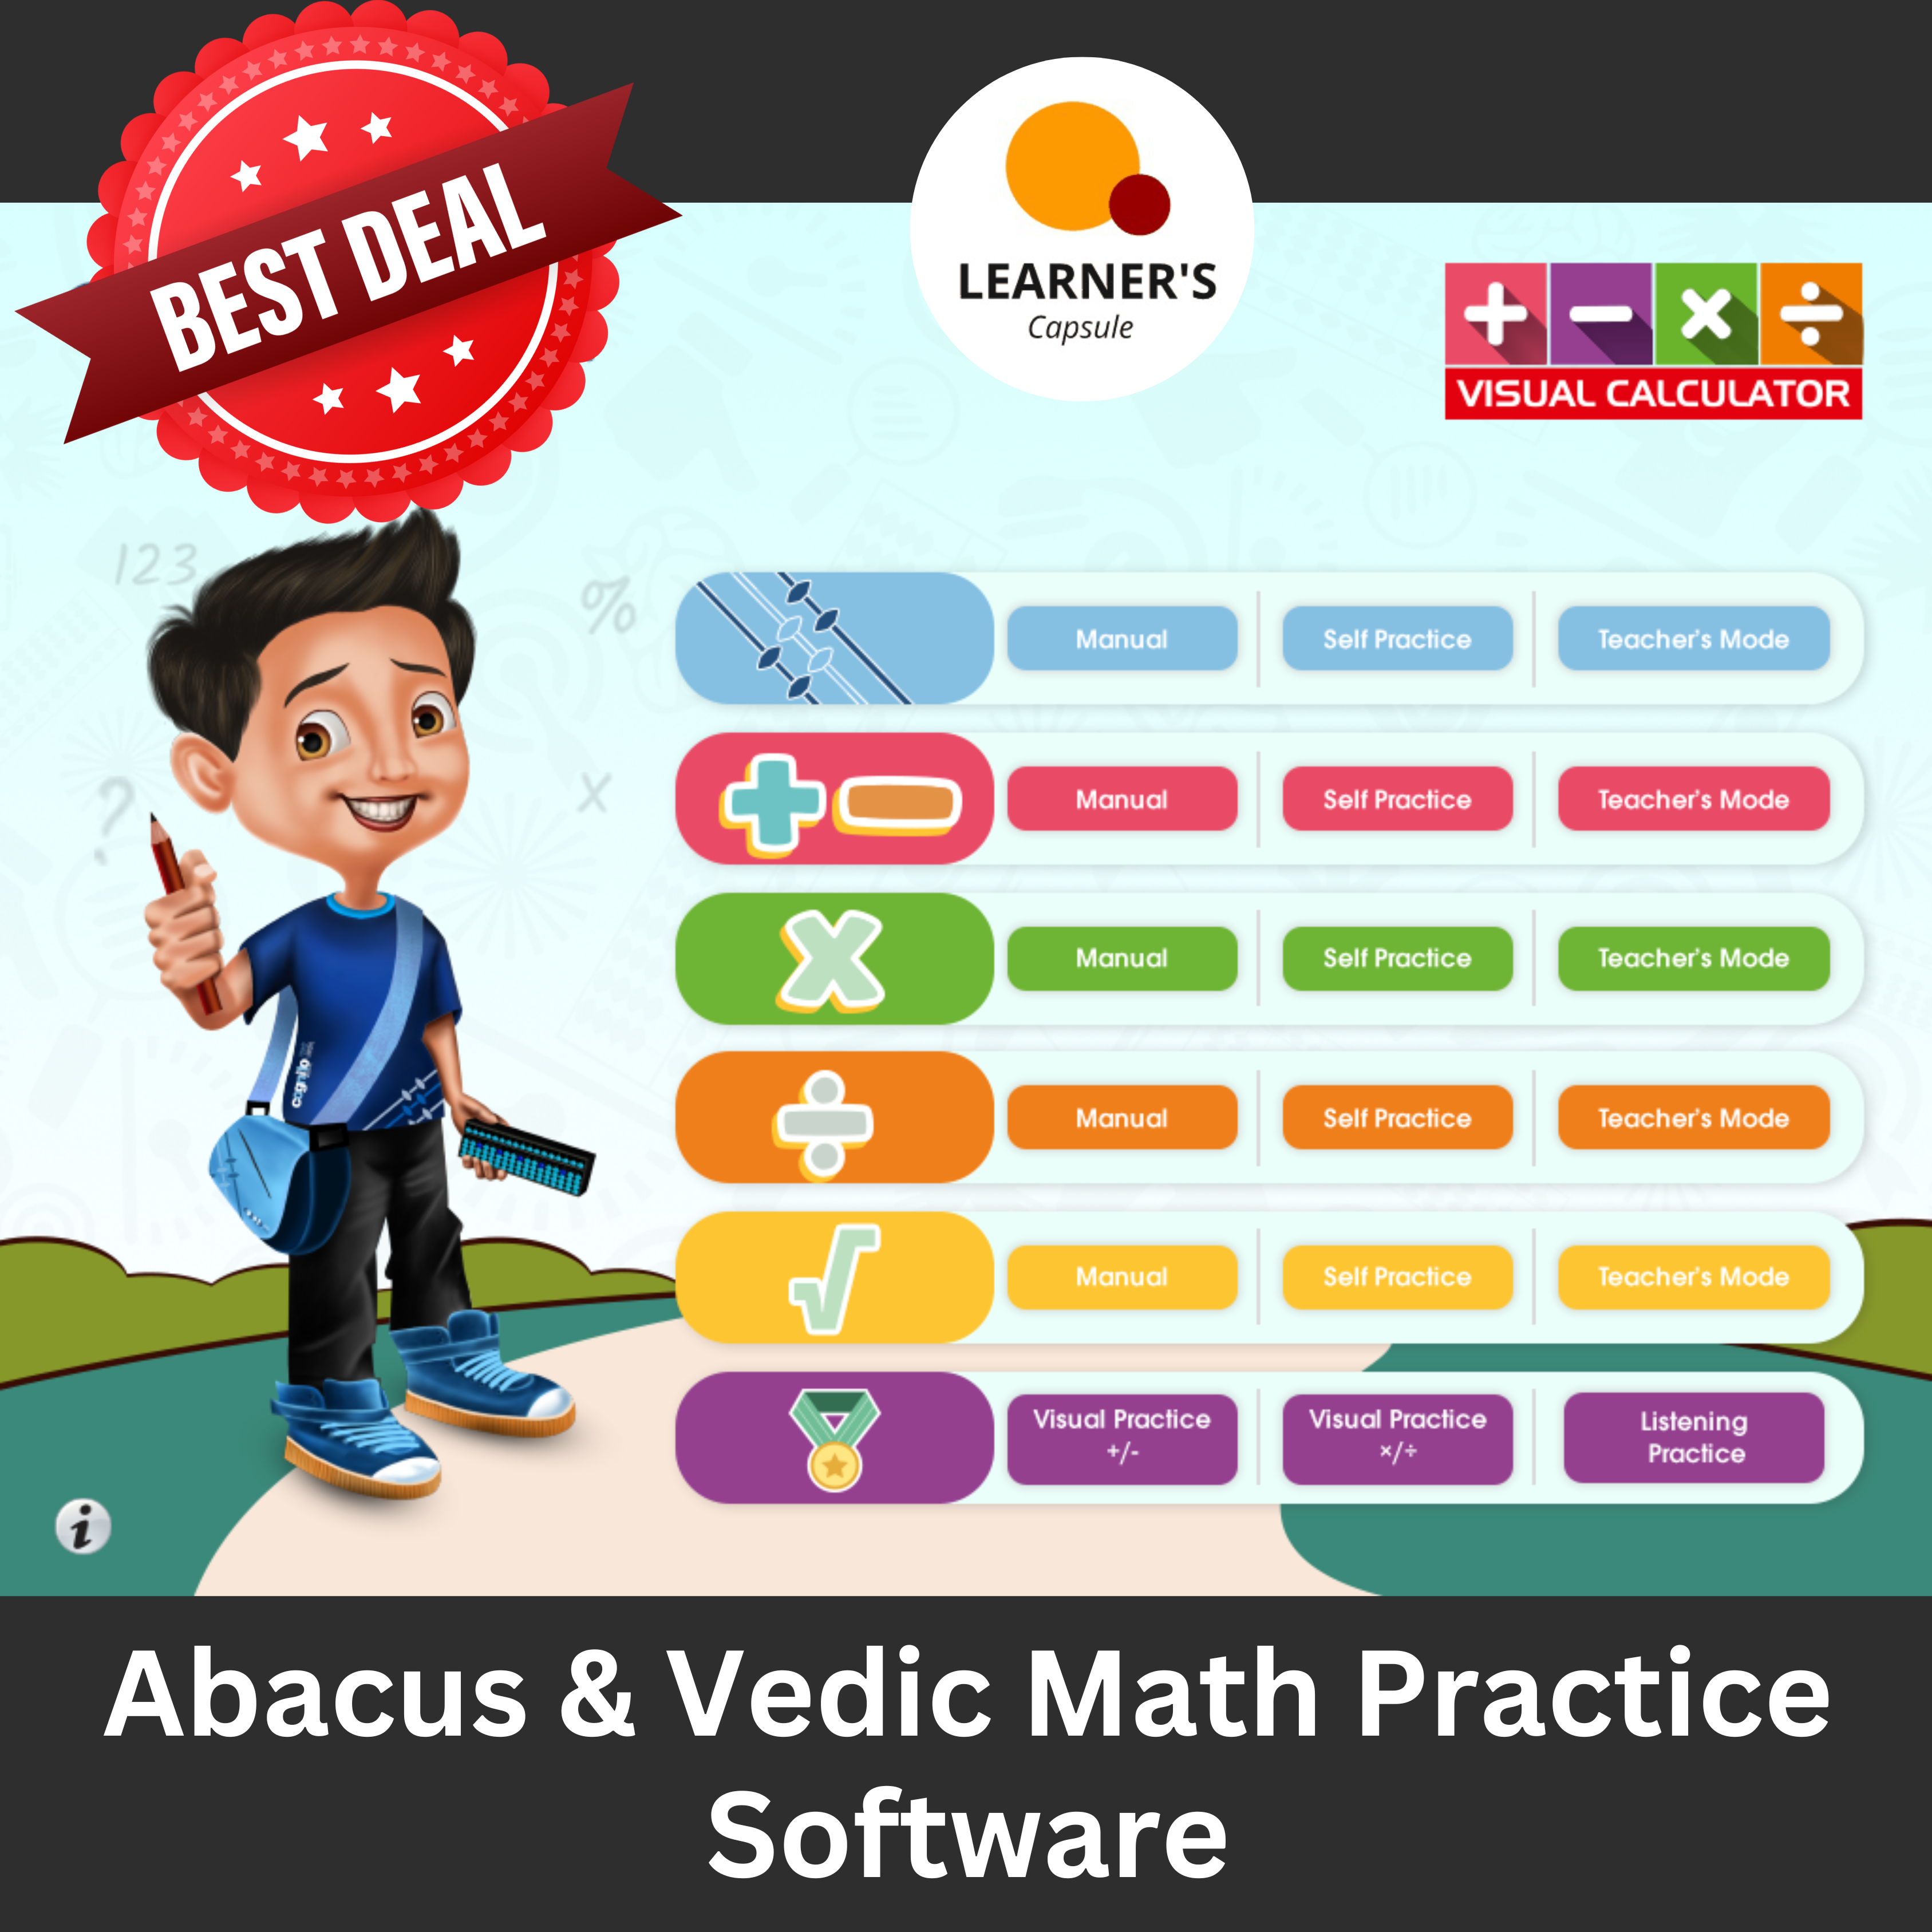 Abacus Practice software